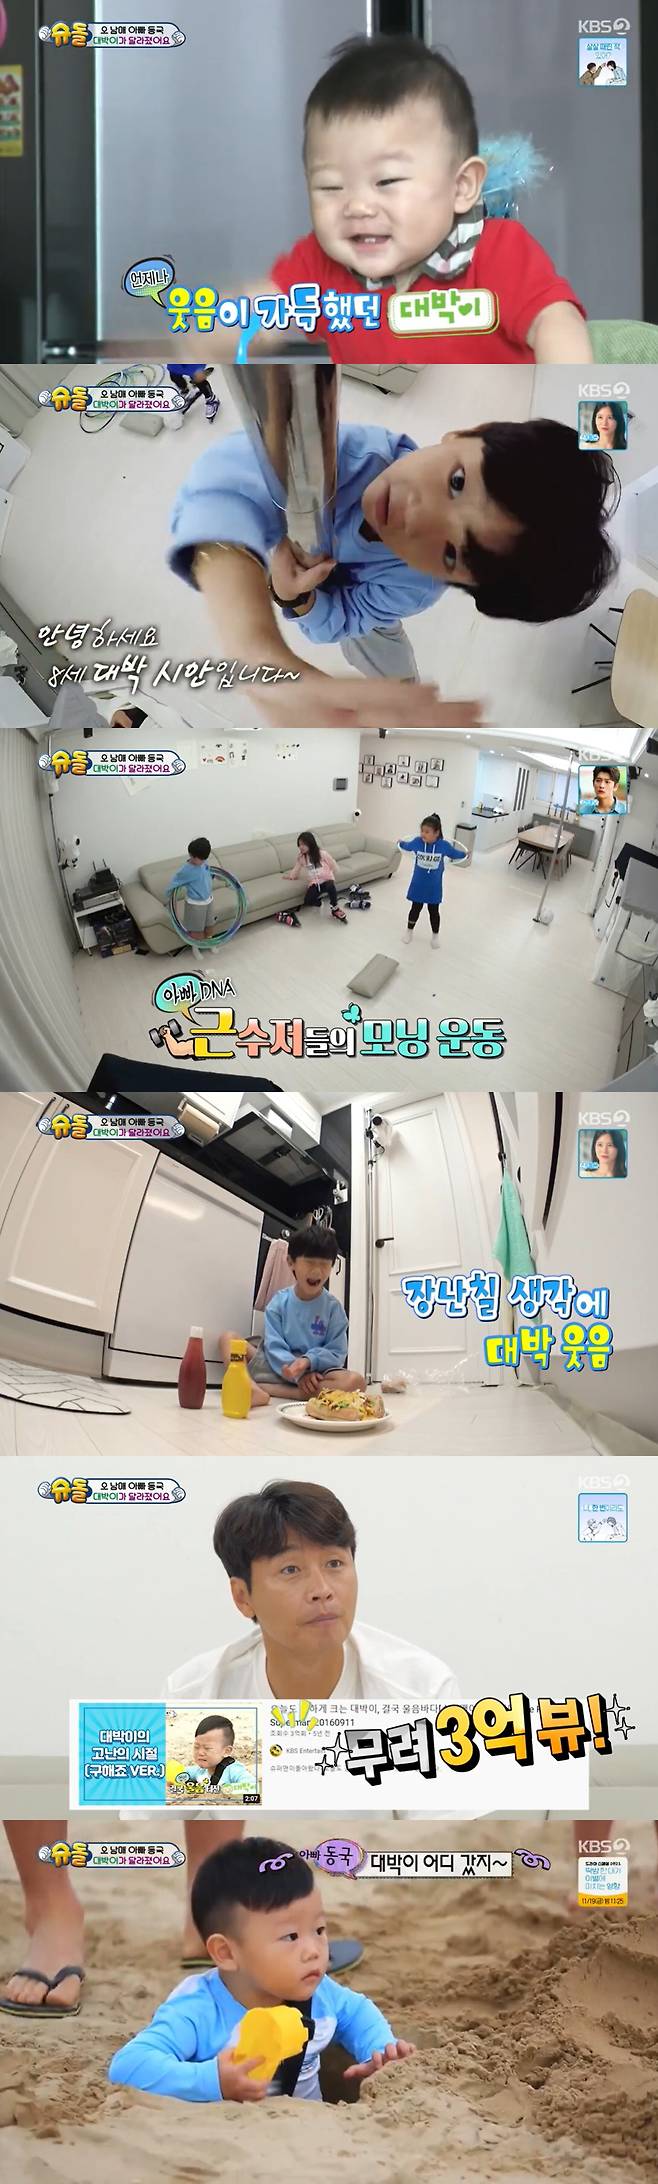 The Return of Superman actor Song Il-gooks son, three twins, Korea, and Hurray, reported on the recent situation.The KBS2 entertainment program The Return of Superman, which was broadcast on the 14th, was featured on the 8th anniversary.The recent news of the family, which had been loved by the special broadcast on the day, was revealed. First, Korea, the Republic of Korea, and Hurray were very big.Im 10 years old, Hurray said, still greeting him with a youthful look.When asked by the cameraman Song Il-gook, How are you doing?, Min-guk asked Dae-yi, How about you tell me you are dating?I am doing well in school and I am doing well, said Korea. I decided to meet my friends at the playground, but I could not keep my promise twice because of Corona.I hope hes gone with his nose, he said.Hurray said, I am worried about whether to take The Return of Superman again. So Song Il-gook said, No.Its so big, he replied, and laughed.I sincerely congratulate you on the 8th anniversary. I hope everyone is full of good things. Everyone is happy.After shooting, he told Song Il-gook, Did you take the father? Im sorry about NG?Lee Dong-gooks recent short-sleeved affair: Sobbing up, Xiani handed over fake water balloon sausages inside a hamburger to tease Father Lee Dong-gook.Lee Dong-gook, who did not know this and opened his mouth, was surprised by the sausage.I teased him and now hes teasing Father, Lee Dong-gook said, but I did not tease you this way.It was really hard when I put it in that sand, Sian laughed, and in the past Lee Dong-gook had rang it in a hole that had been dug into the sand in advance.Lee Dong-gook said, The video has 300 million views. BTS music video is 300 million views.Yang ji-eun woke up with a lovely brother and sister; breakfast time, children multi-invested yang ji-eun meddled and soothed in a caring manner.Singer Hyun-sook then came to the house of yang ji-eun. yang ji-eun rolled his feet in a welcome heart, and Hyun-sook gave gifts as soon as he met the children.Hyun Sook also showed a different charm to play with the childrens eye level.This year, I have been transplanting Kidney to my father for 11 years, and I have broken my new Kidney.My Kidney is fine and it was so sad to say that Kidney in Fathers body was broken.I do not have any Kidney to give now ... I saw my father live for 11 more years and marry, I saw my grandchildren and granddaughter, and I saw that Mistrot was the first.I think you resigned, said Peritoneal Dialesis, which has recently begun.I think my father would love it if he saw you, Yang Ji-eun told Hyun-sook, who then made a video call with his father to make a meeting with Hyun-sook.Hyun Sook sang and cheered for the father of Yang ji-eun.My father said, I am going to get better and I will be discharged tomorrow. Yang Ji-eun shed tears.Hyun Sook said, My mother was struggling because she was sick. If I see tears, my parents are hard, too. I cried and pretended not to cry.Sayuri entered the station with her son Jen to collect donated items; Sayuri said: I wanted to donate items to single mothers.I came because I thought there would be a variety of people and things in the station. Sayuri first met singer Hyun Jin-young and Na Tae-joo and received stage costumes and cute stickers for them.Kim Dae-hyun received a number of donations from stars, including mini bags, Ailee soap and cosmetics, and Jung In-eun donated shoes.